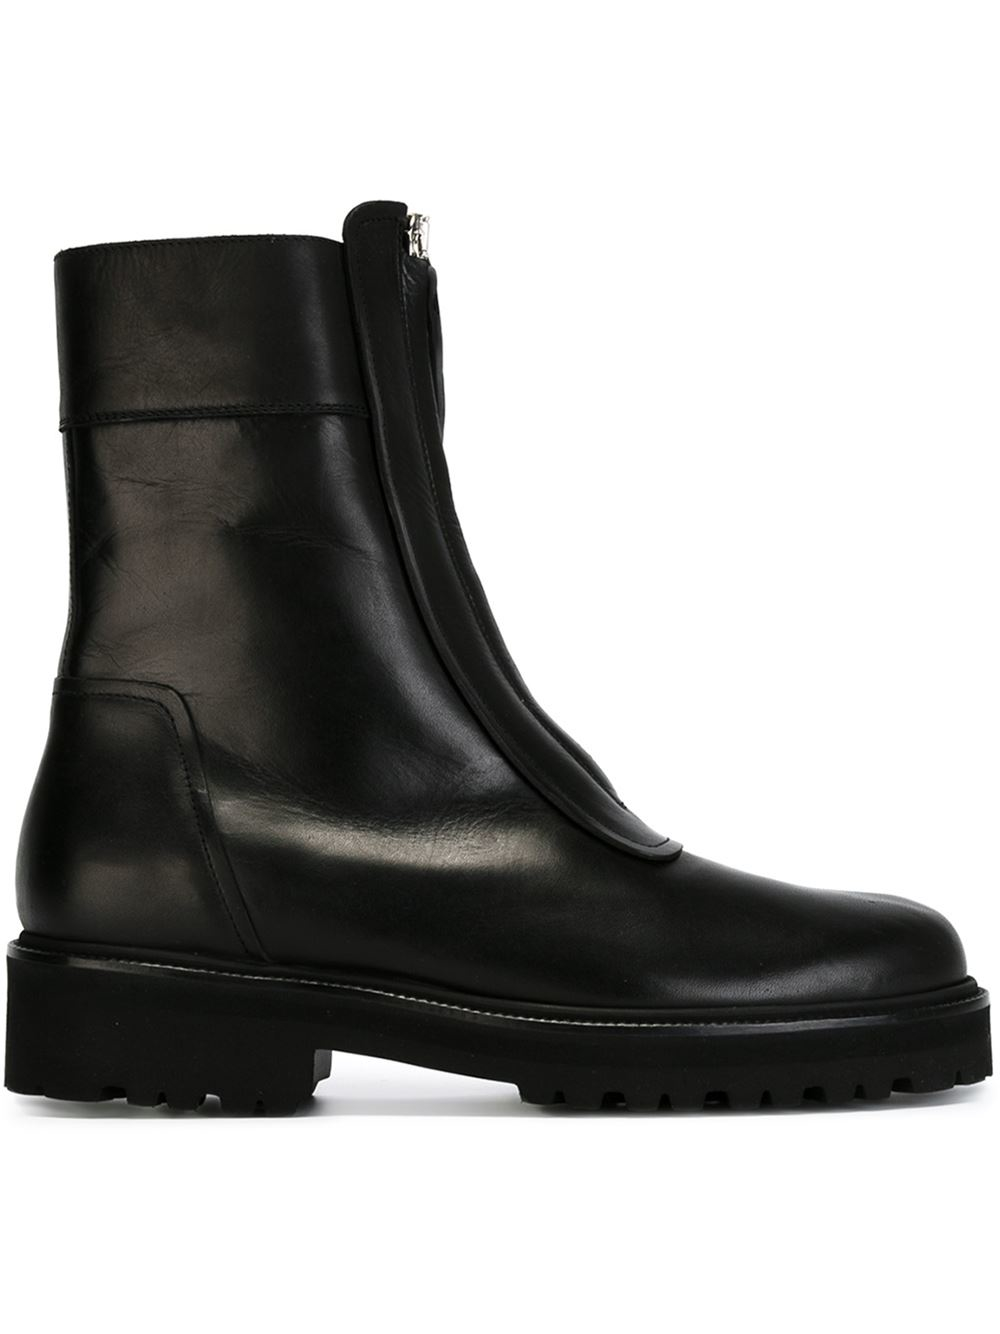 Mm6 by maison martin margiela Front Zip Boots in Black | Lyst